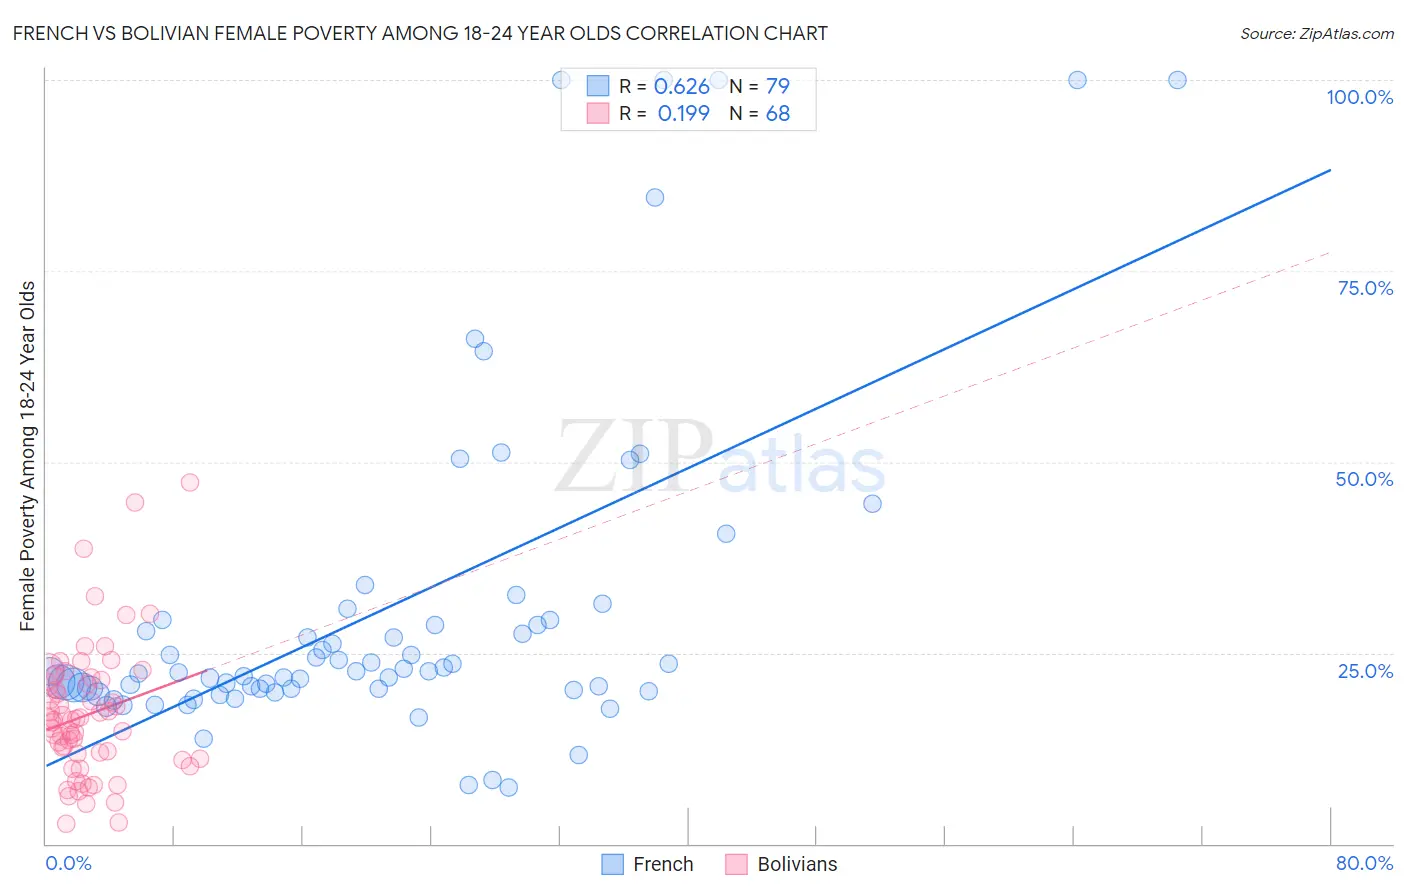 French vs Bolivian Female Poverty Among 18-24 Year Olds